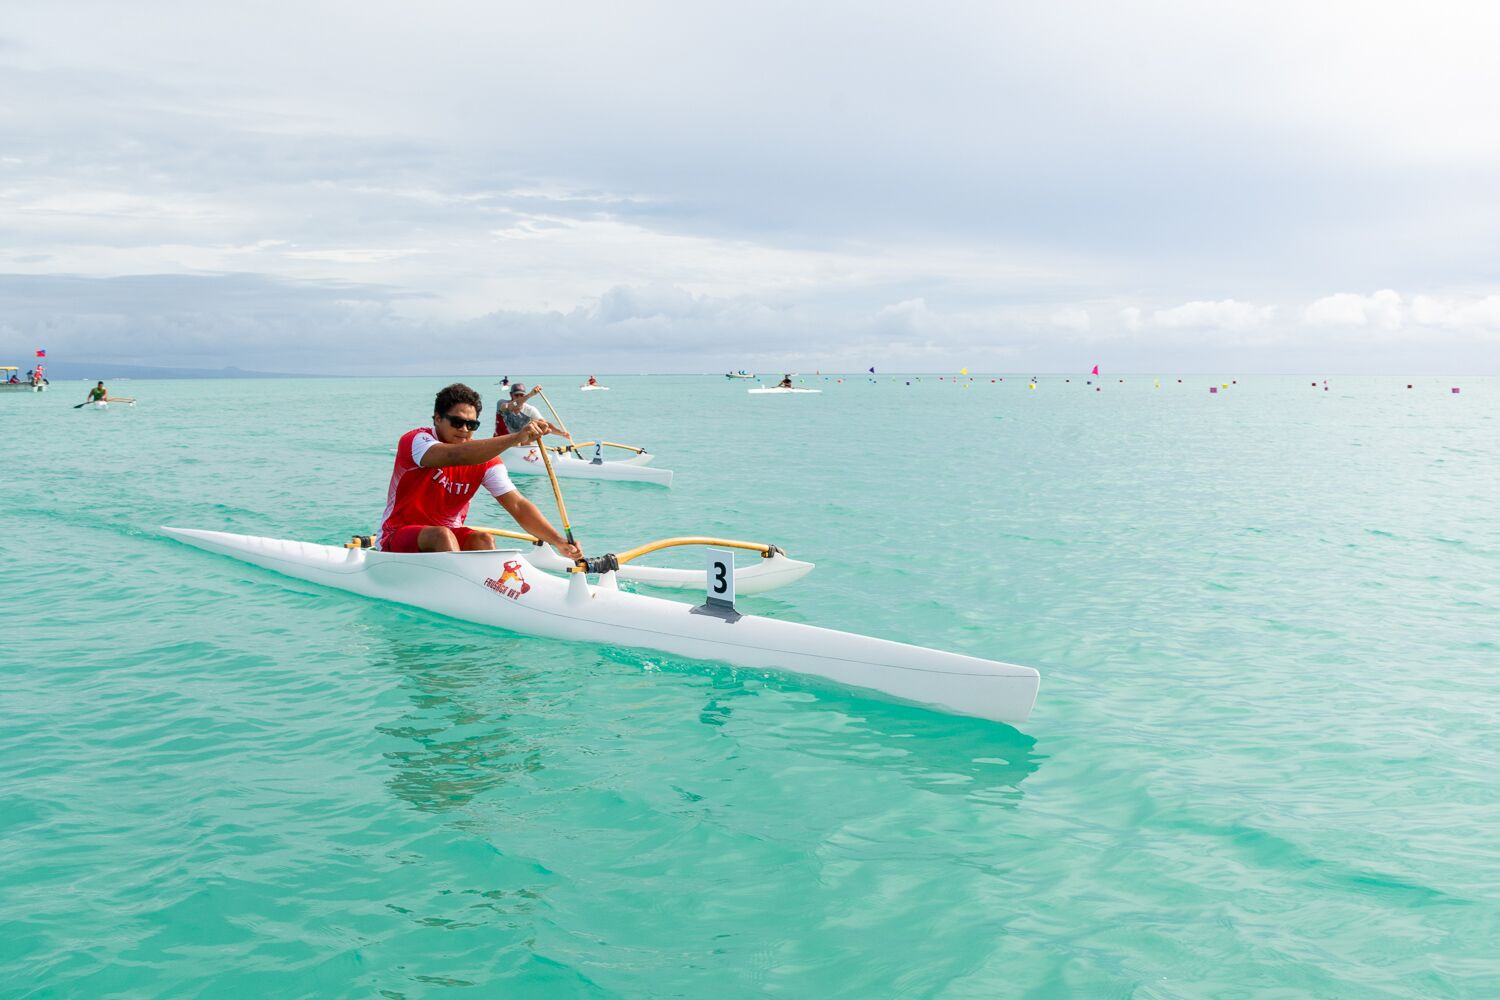 Competition in the outrigger canoeing event continued in idyllic conditions ©Games News Service